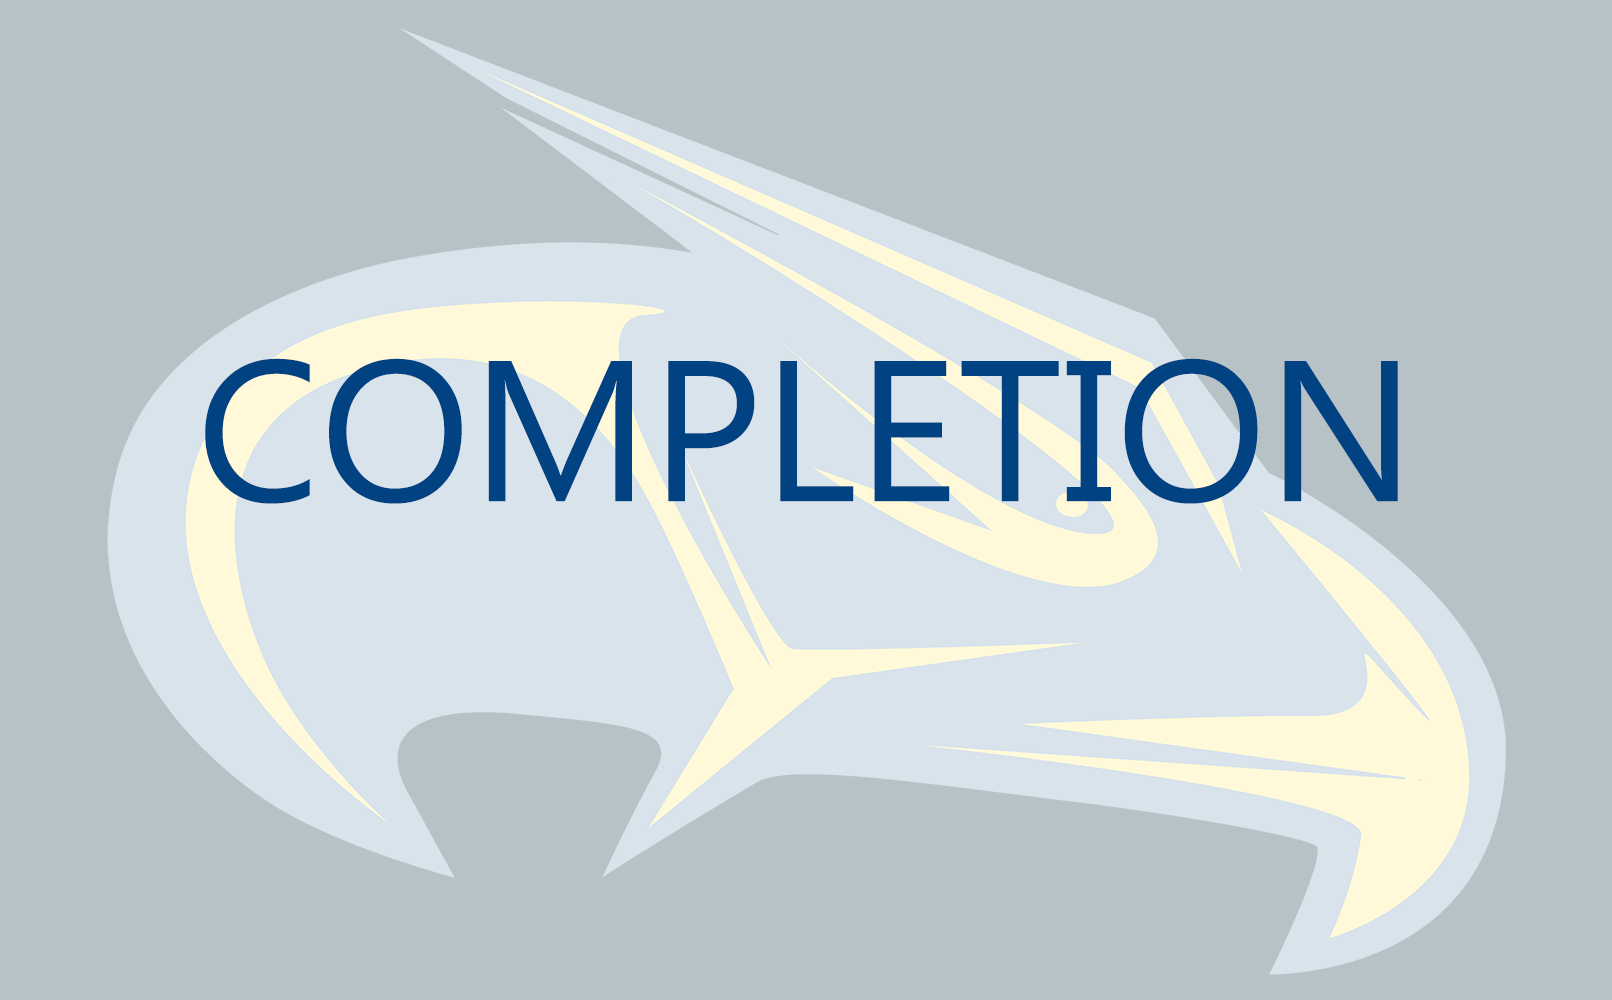 COMPLETION